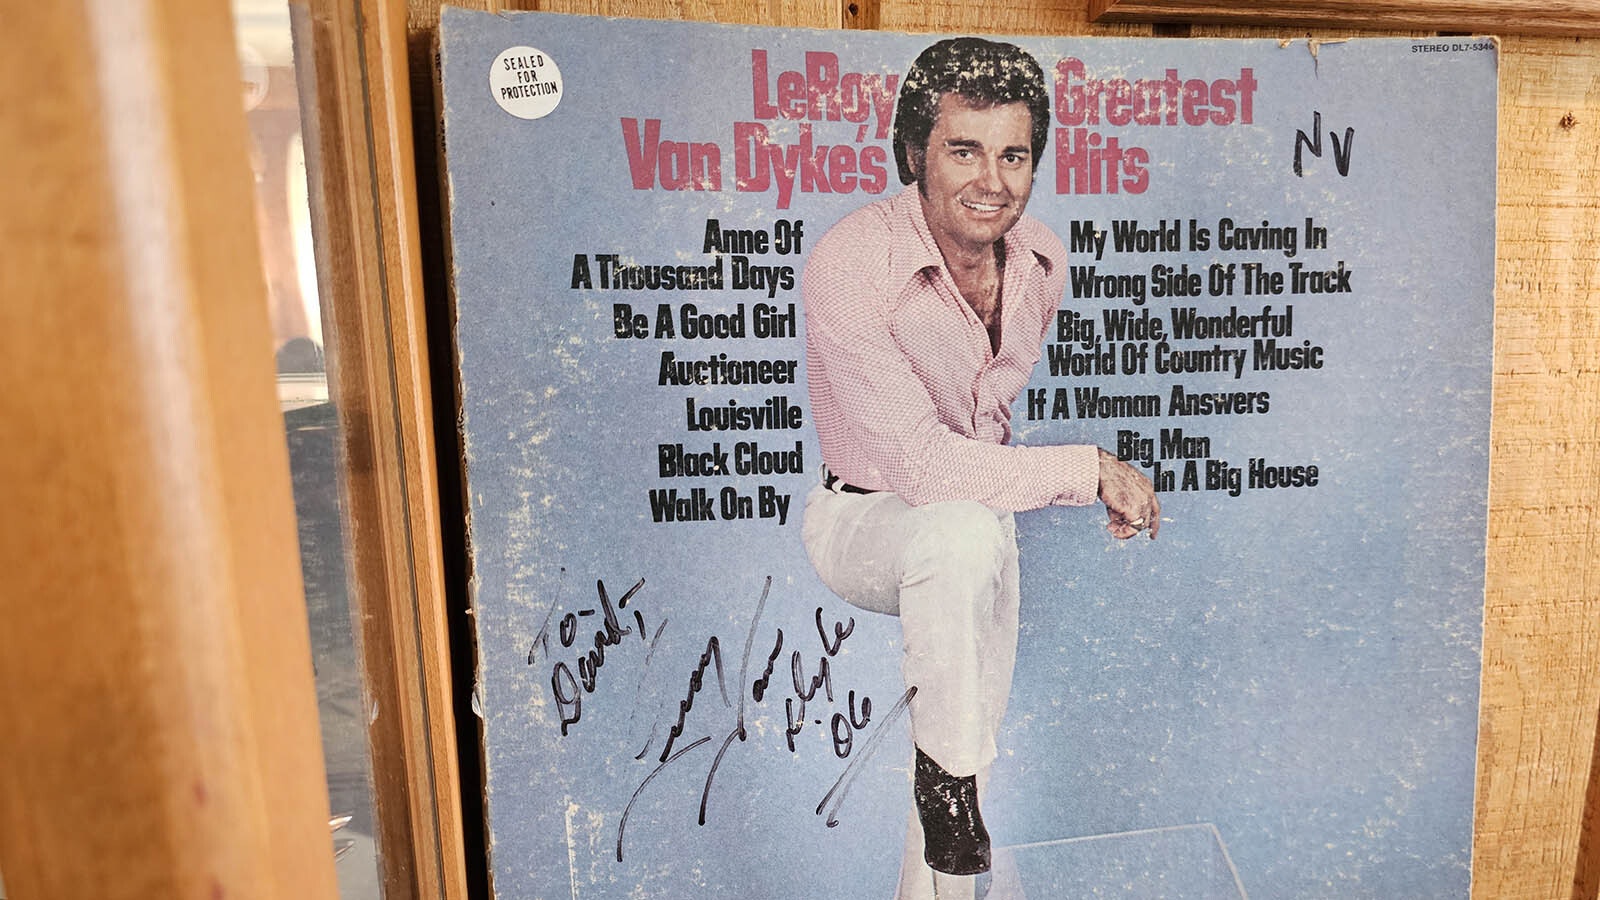 This signed LeRoy Van Dyke album with the song "The Auctioneer" on it has sentimental value for Sublette County auctioneer Dave Stephens.